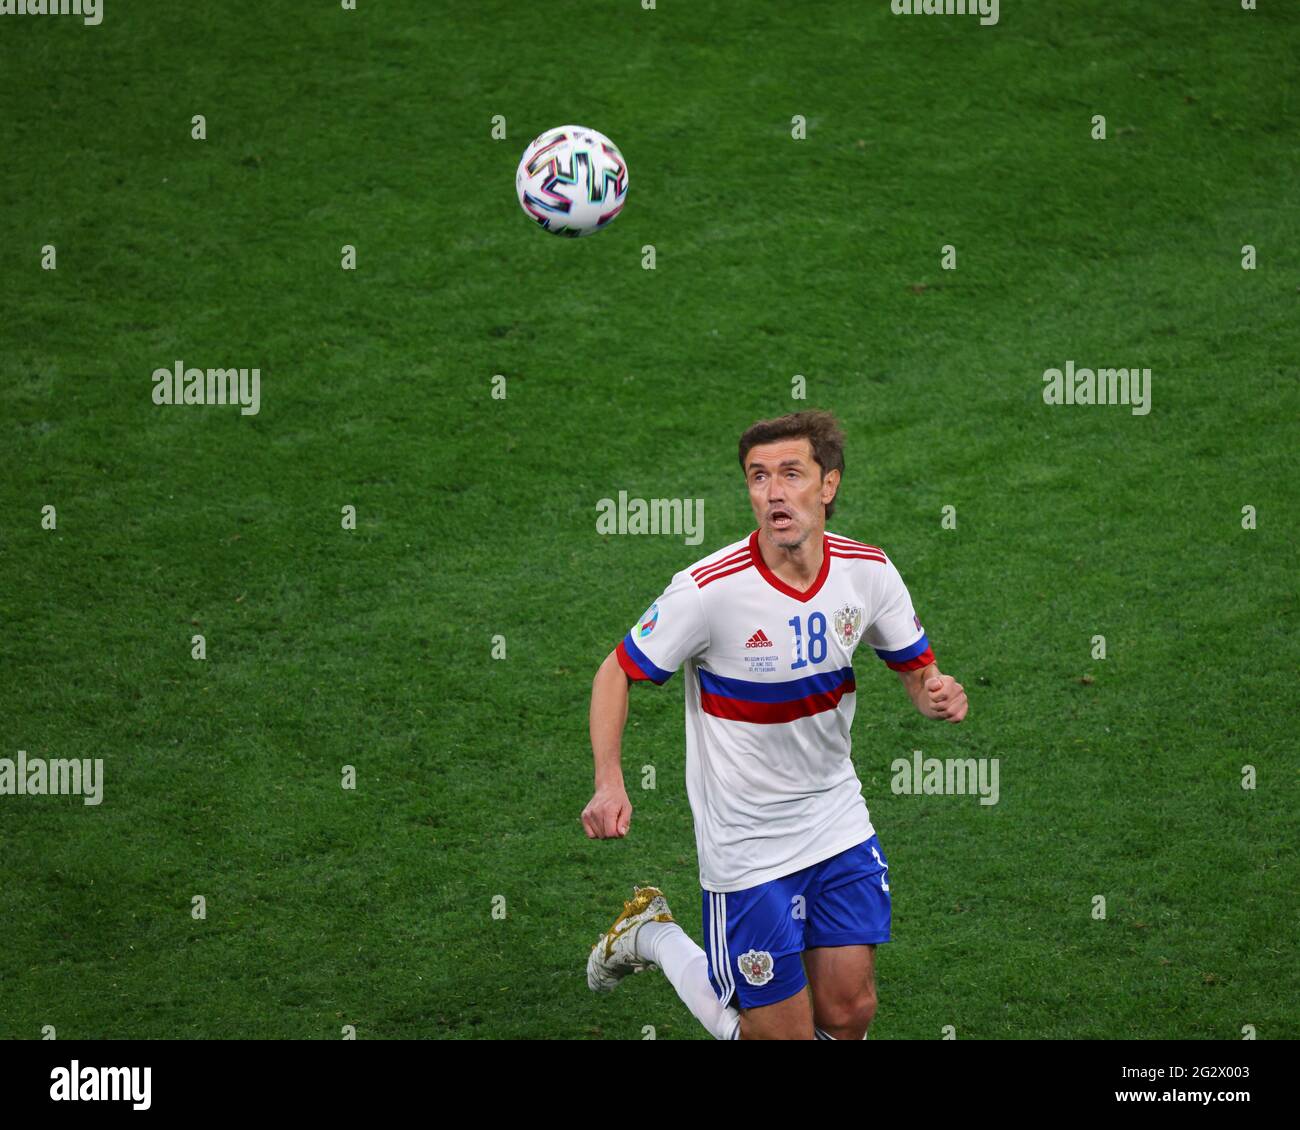 Saint Petersburg, Russia. 12th June, 2021. Yuri Zhirkov (18) of Russia seen in action during the European championship EURO 2020 between Russia and Belgium at Gazprom Arena.(Final Score; Russia 0:3 Belgium). Credit: SOPA Images Limited/Alamy Live News Stock Photo